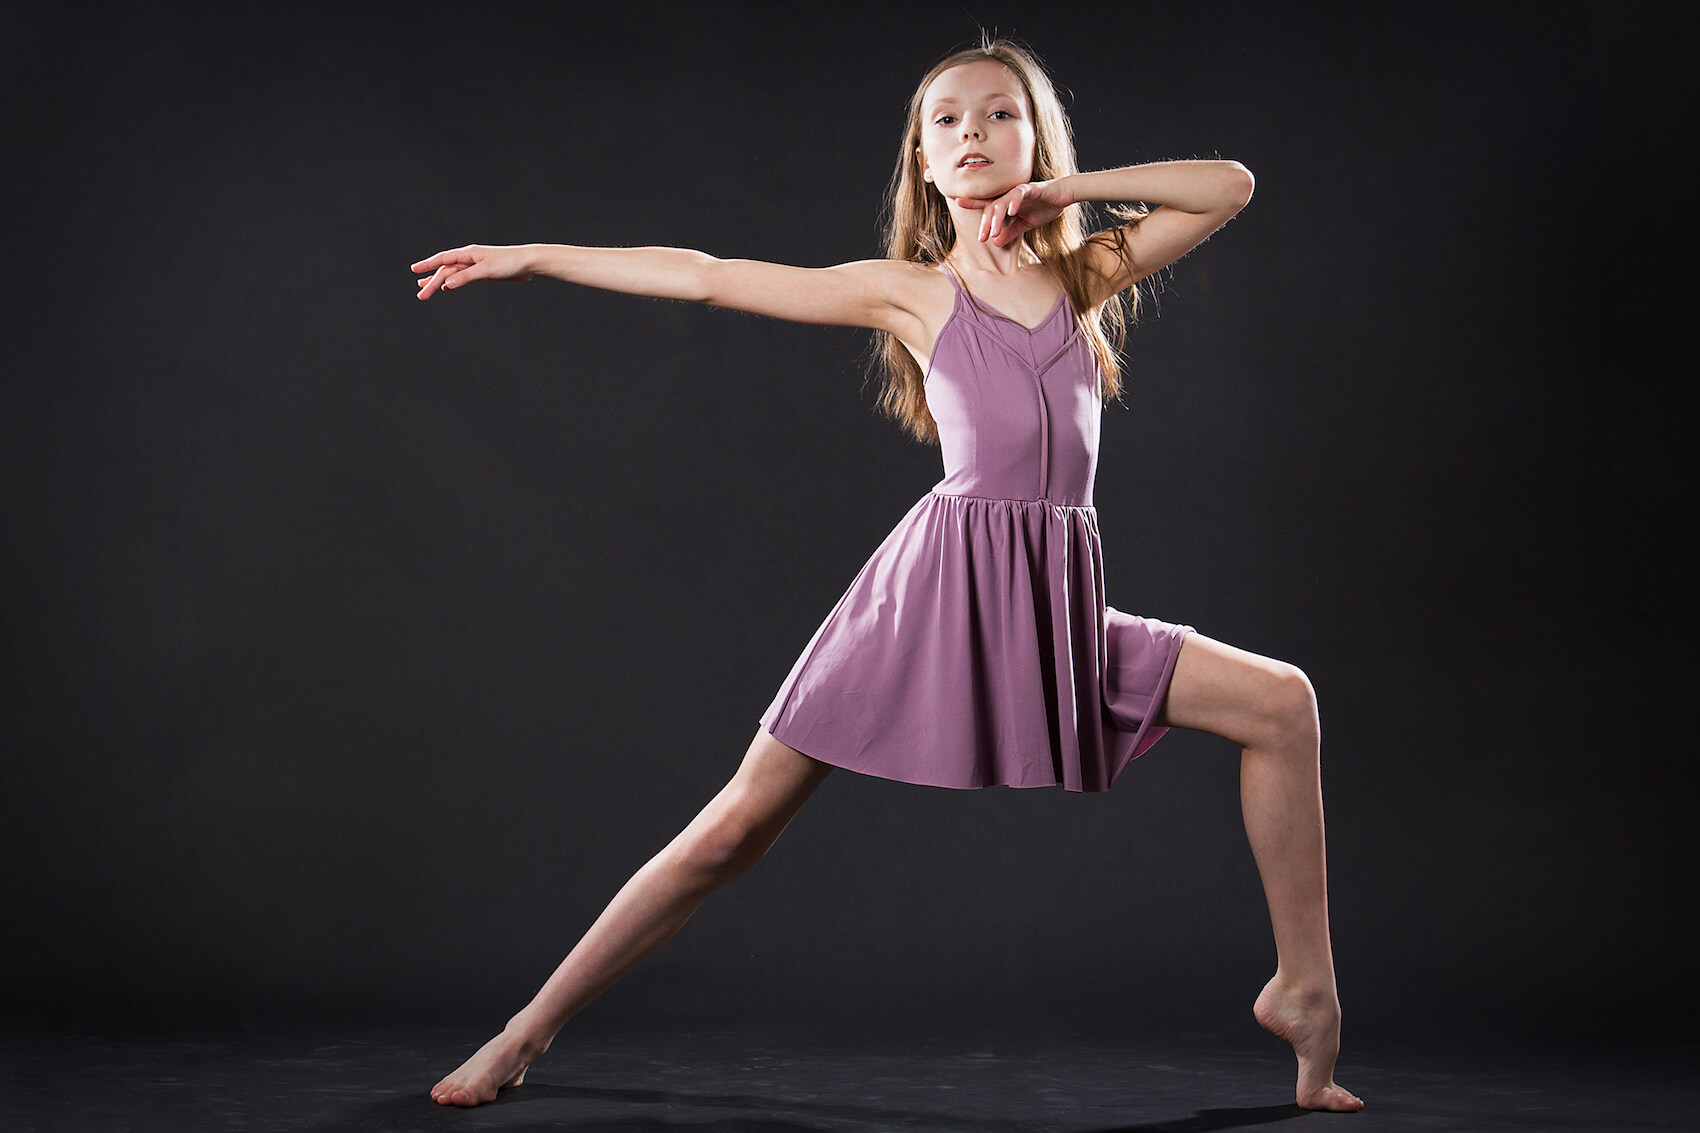 easy lyrical poses - Google Search | Dance photography poses, Dance picture  poses, Ballet poses